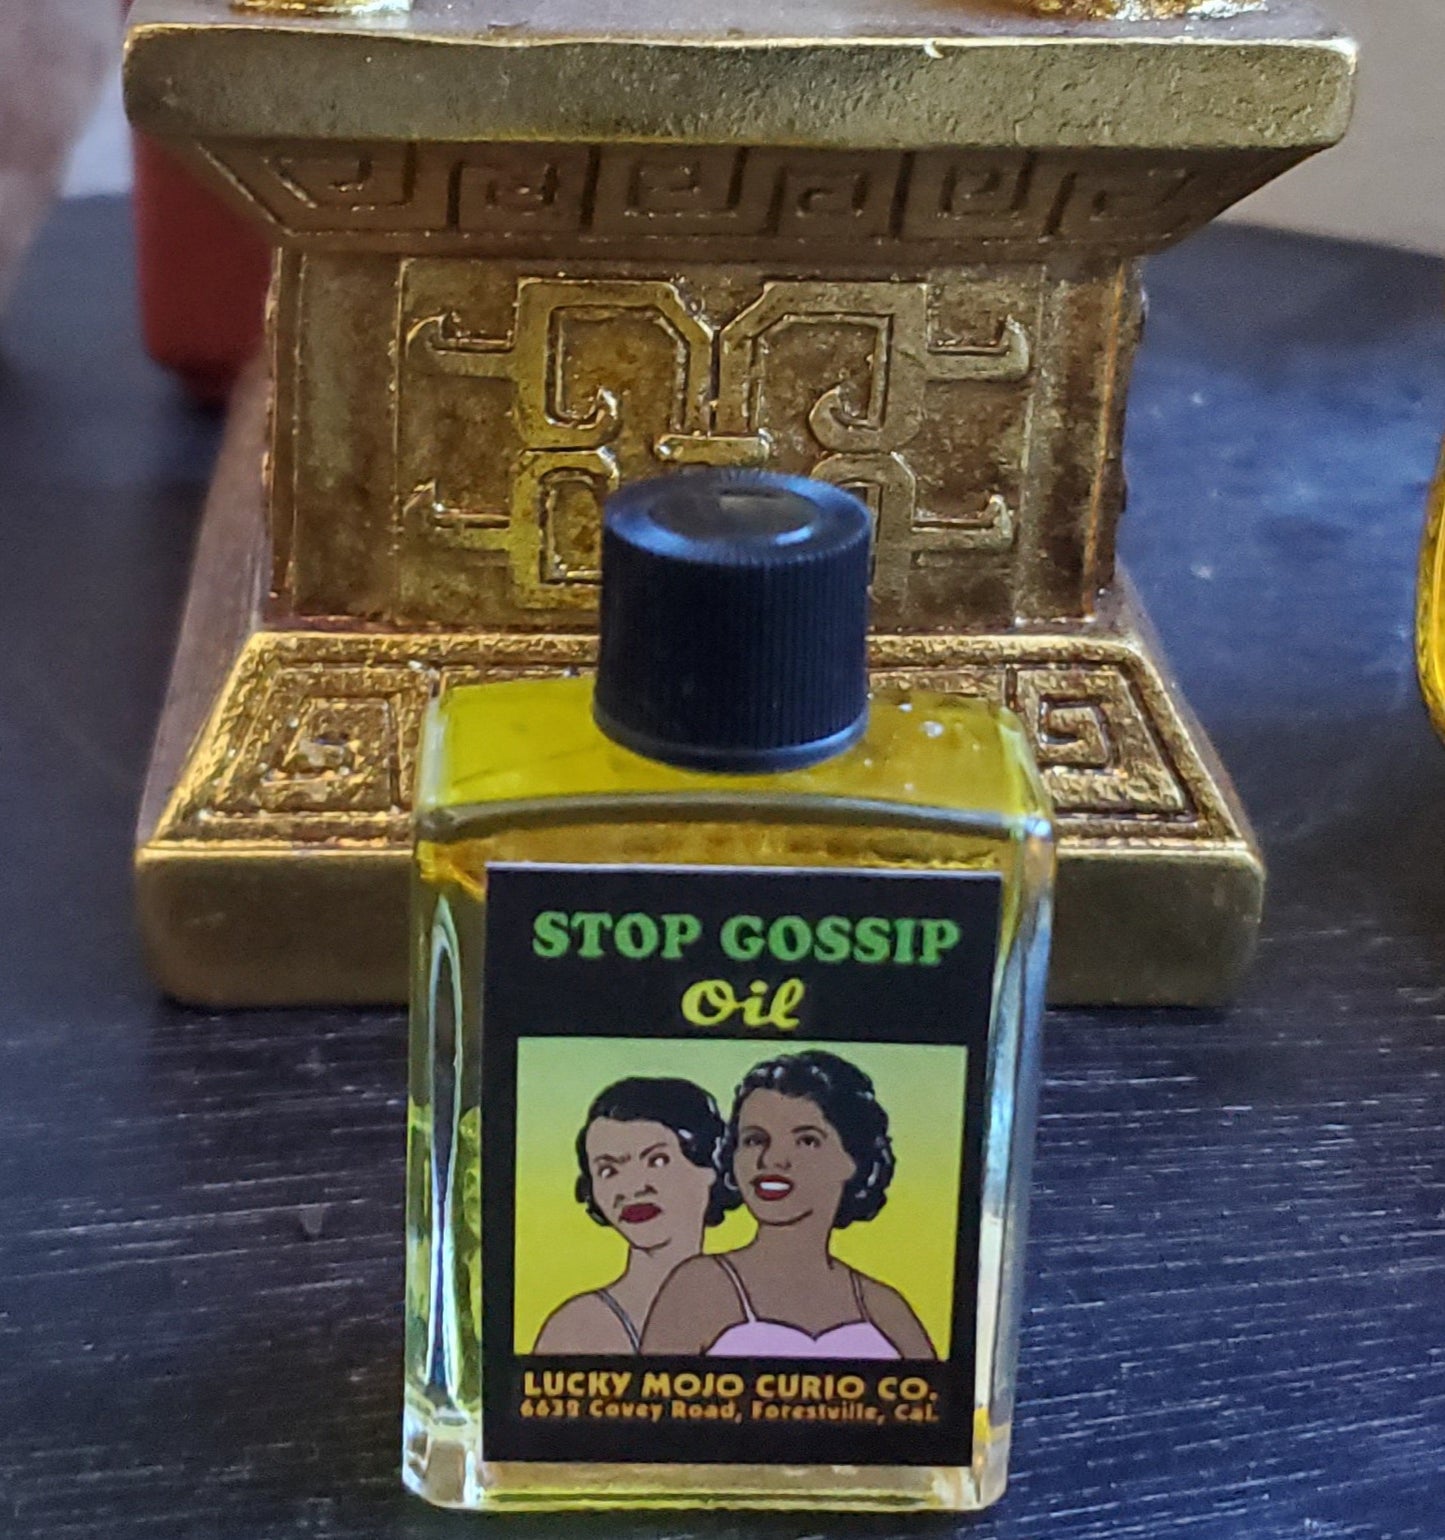 #LuckyMojoCurioCo Stop Gossip Anointing / Conjure Oil #Great Deal